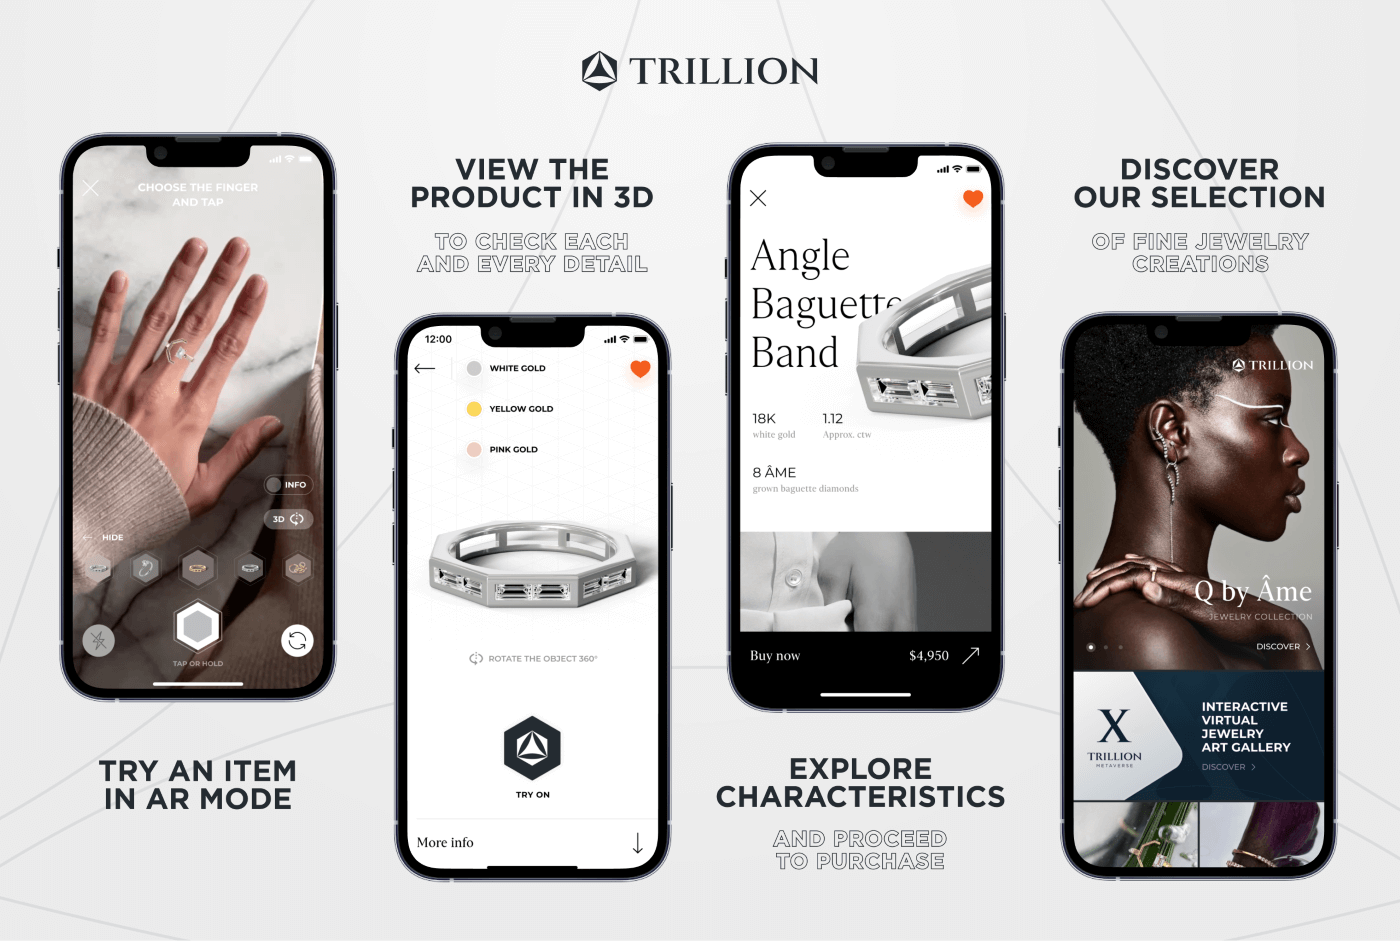 Get Accurate and Realistic Virtual Try-On Experiences for Jewelry With Trillion